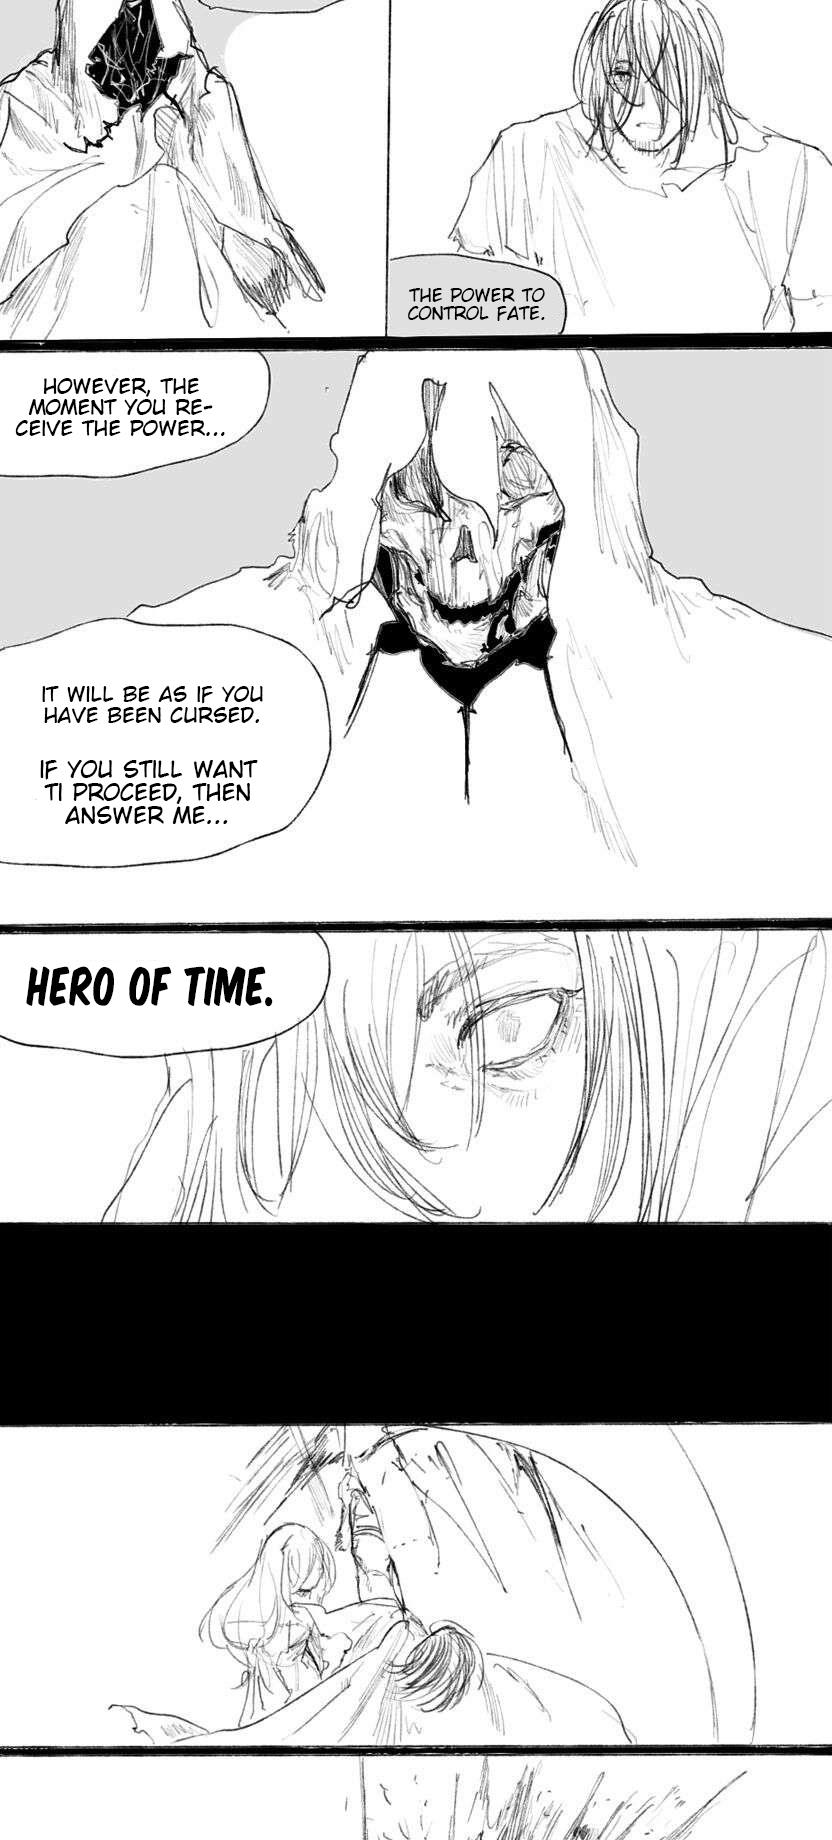 Hero Of Time - Page 2